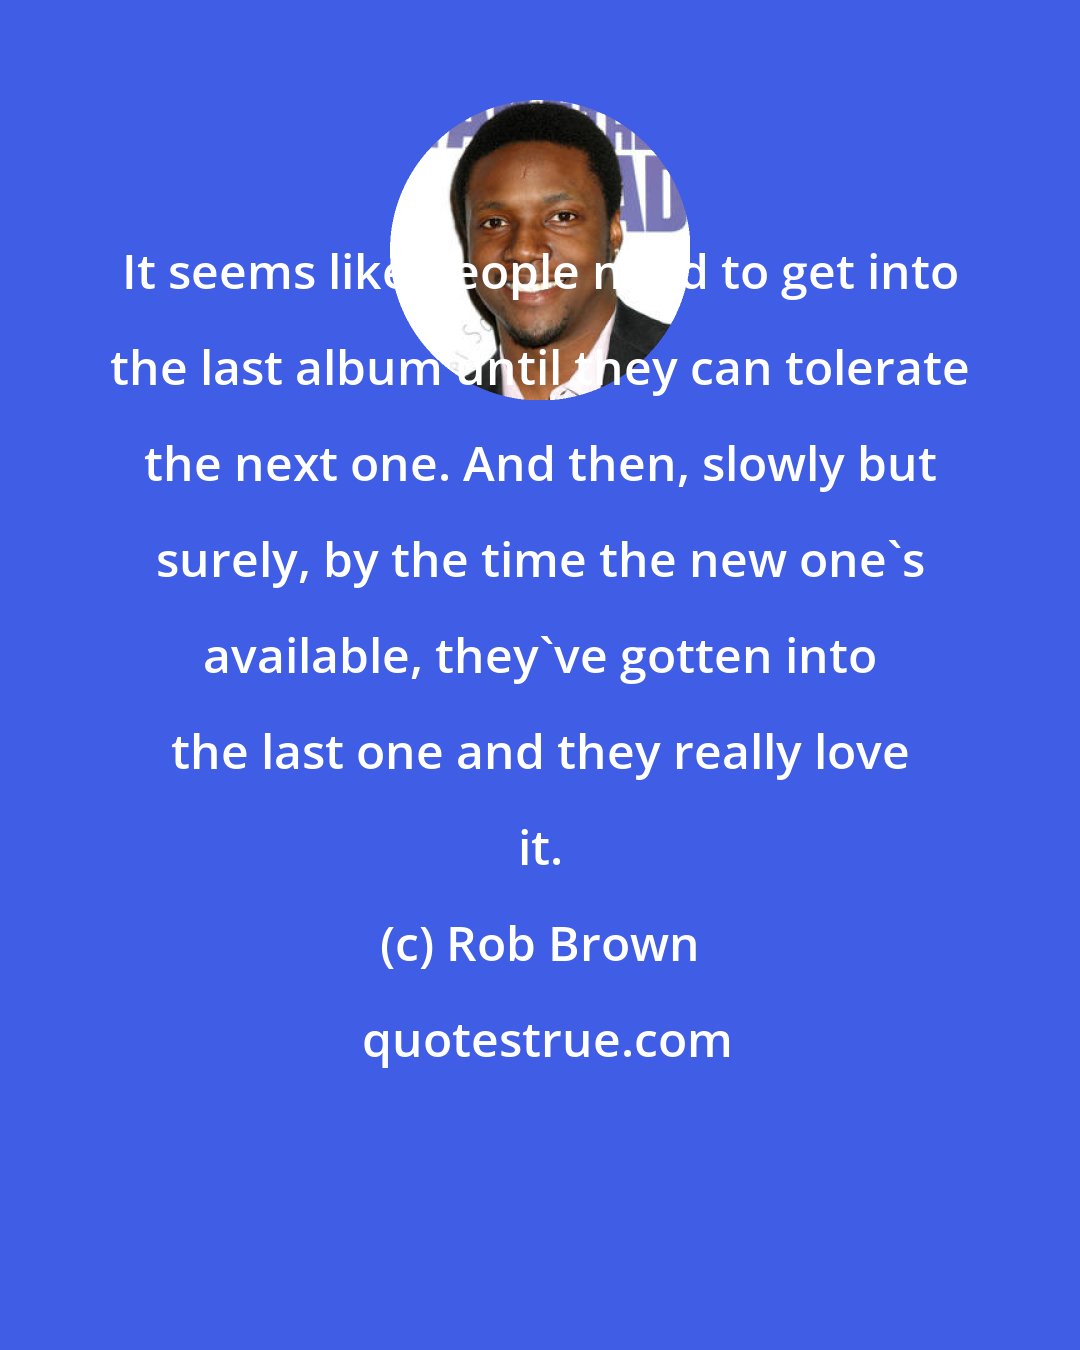 Rob Brown: It seems like people need to get into the last album until they can tolerate the next one. And then, slowly but surely, by the time the new one's available, they've gotten into the last one and they really love it.